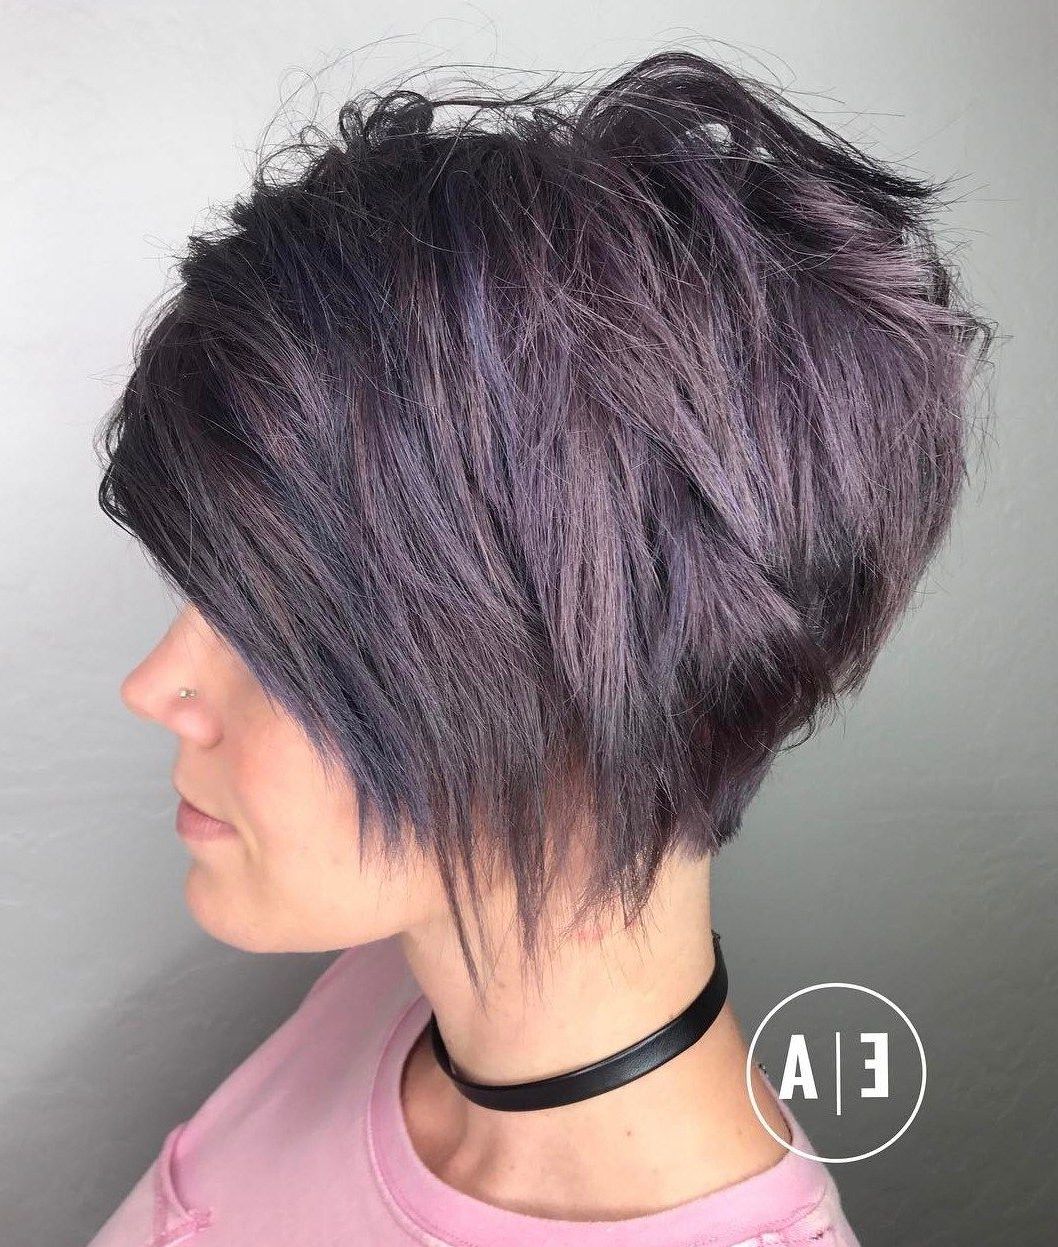 100 Mind Blowing Short Hairstyles For Fine Hair | Pixies, Short Regarding Edgy Purple Tinted Pixie Haircuts (View 2 of 20)